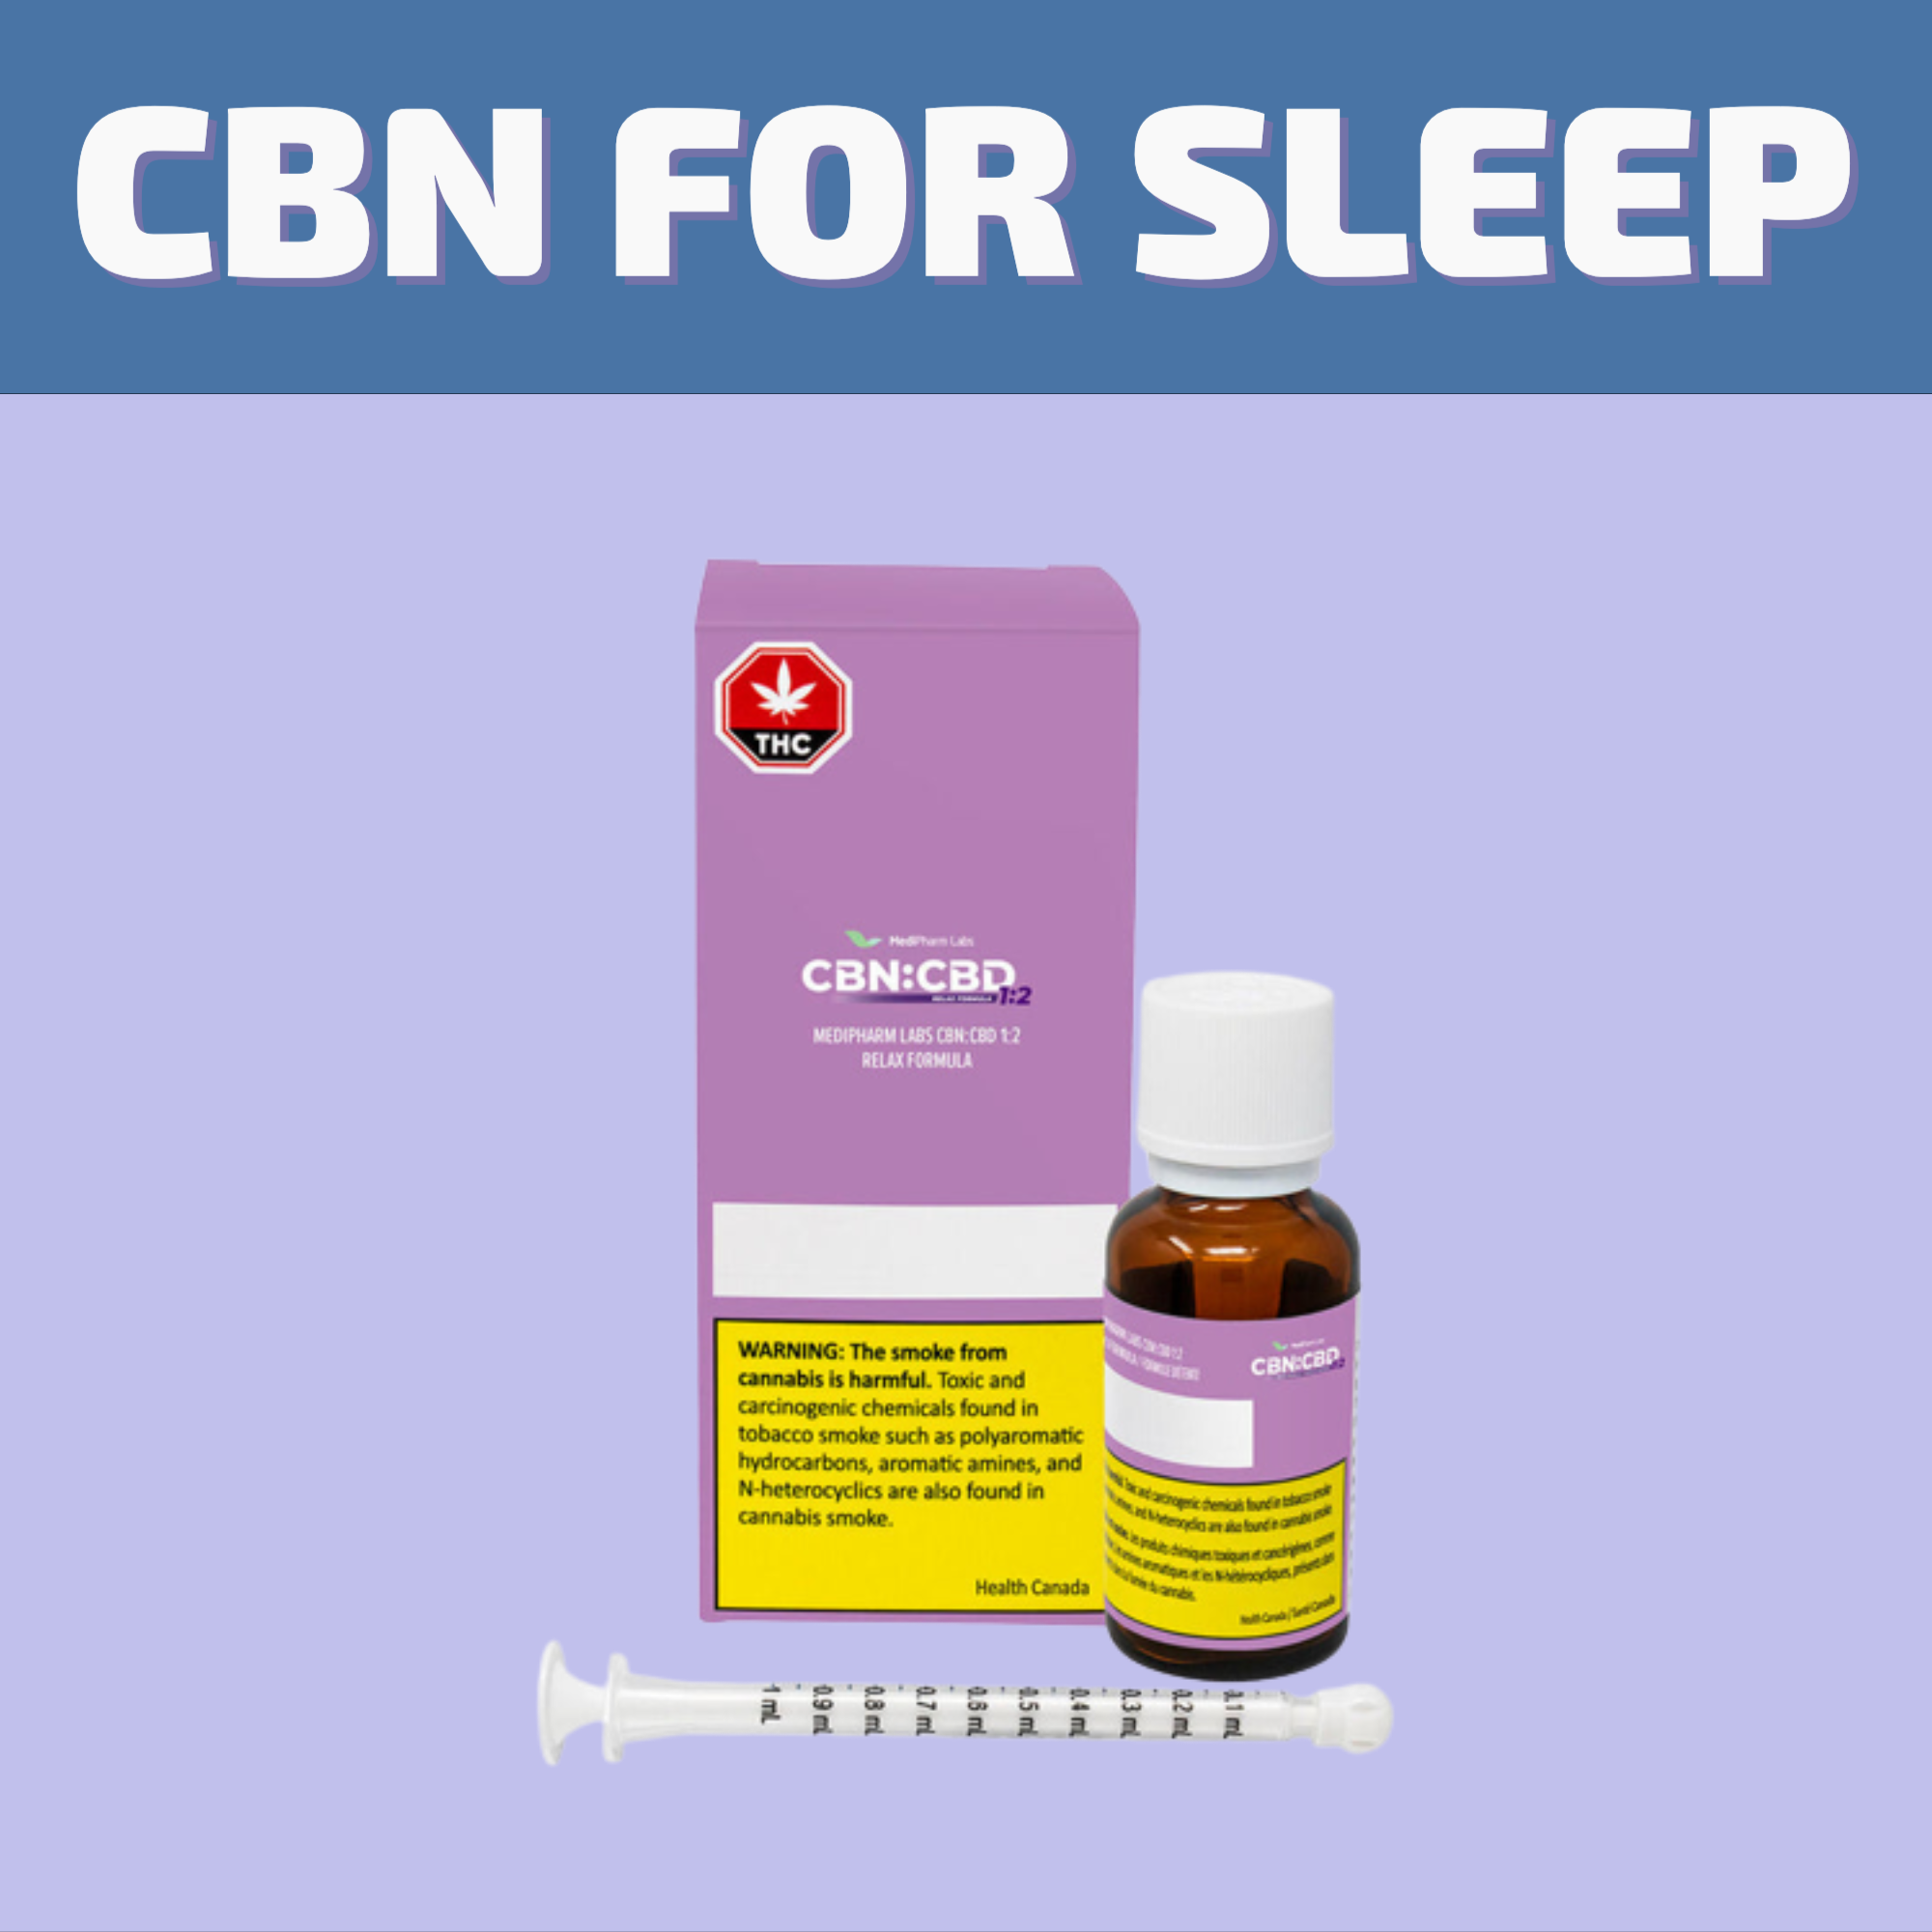 Shop our selection of infused CBN Oil for sleep at our cannabis store in Winnipeg on 580 Academy Road or order online for same day delivery.  